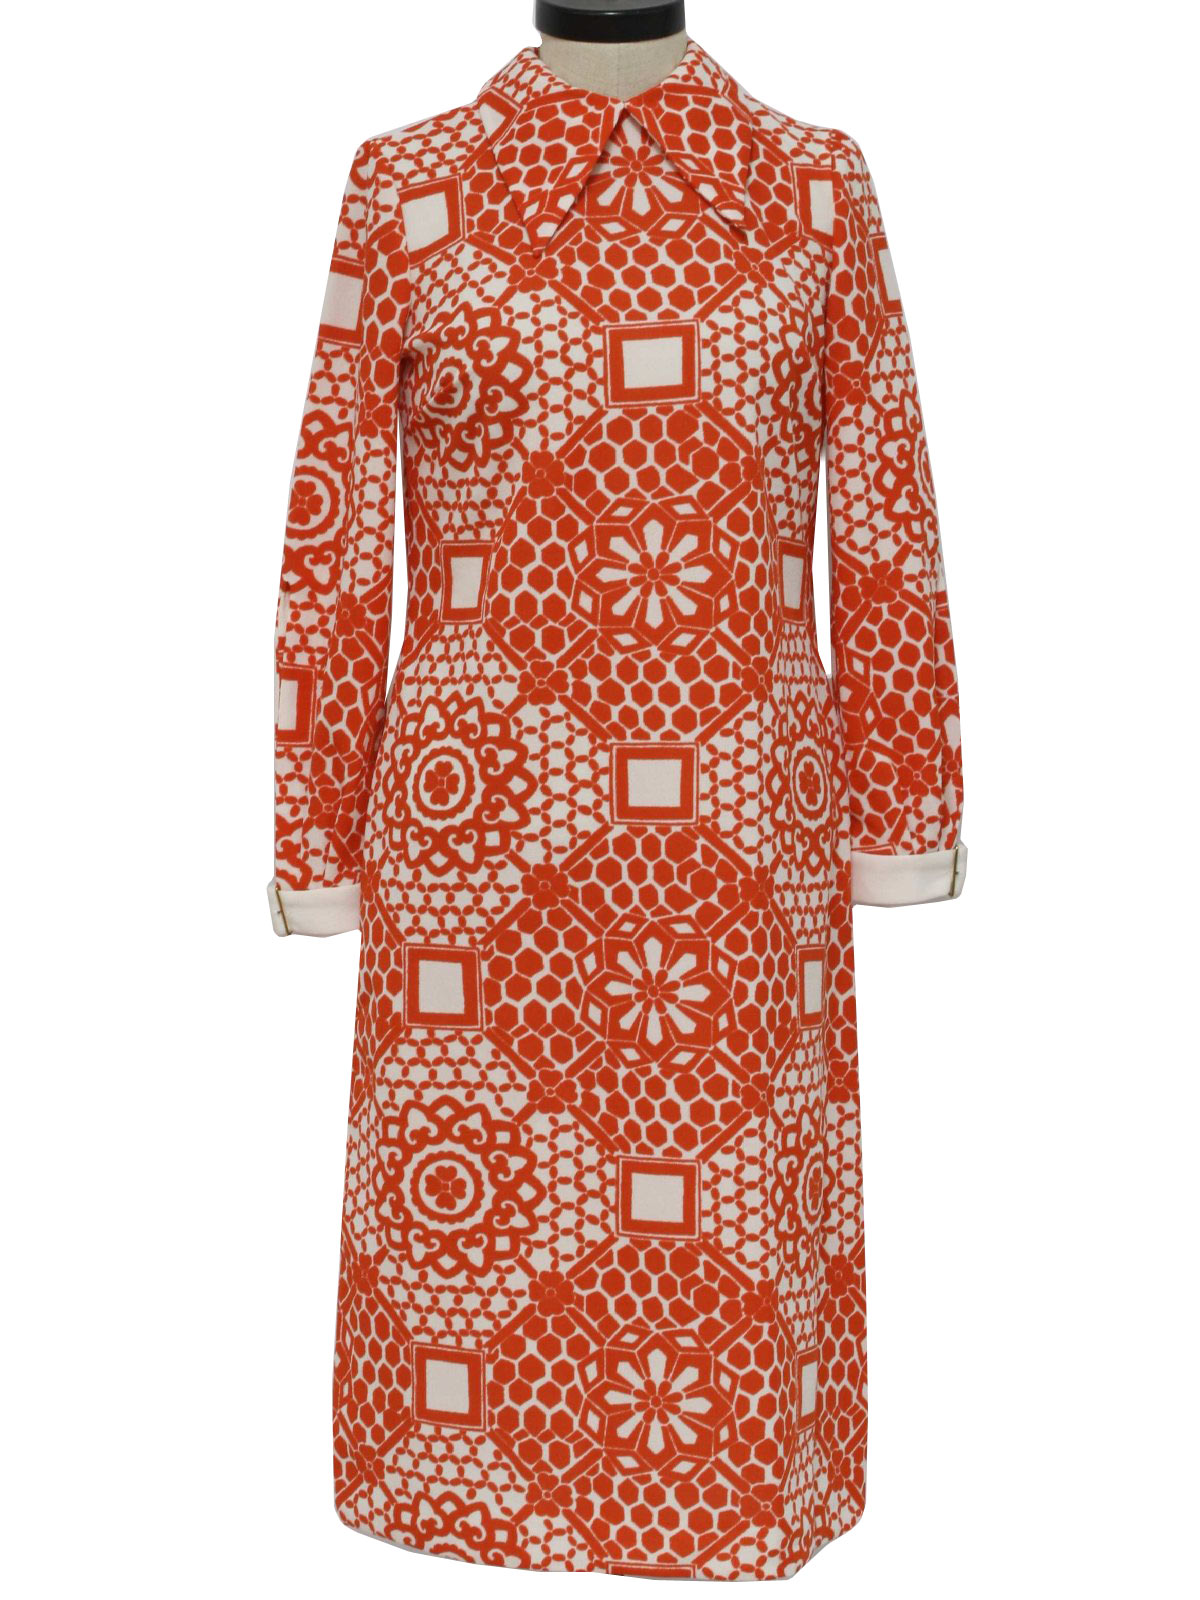 70's Alfred Werber Dress: 70s -Alfred Werber- Womens white and red ...